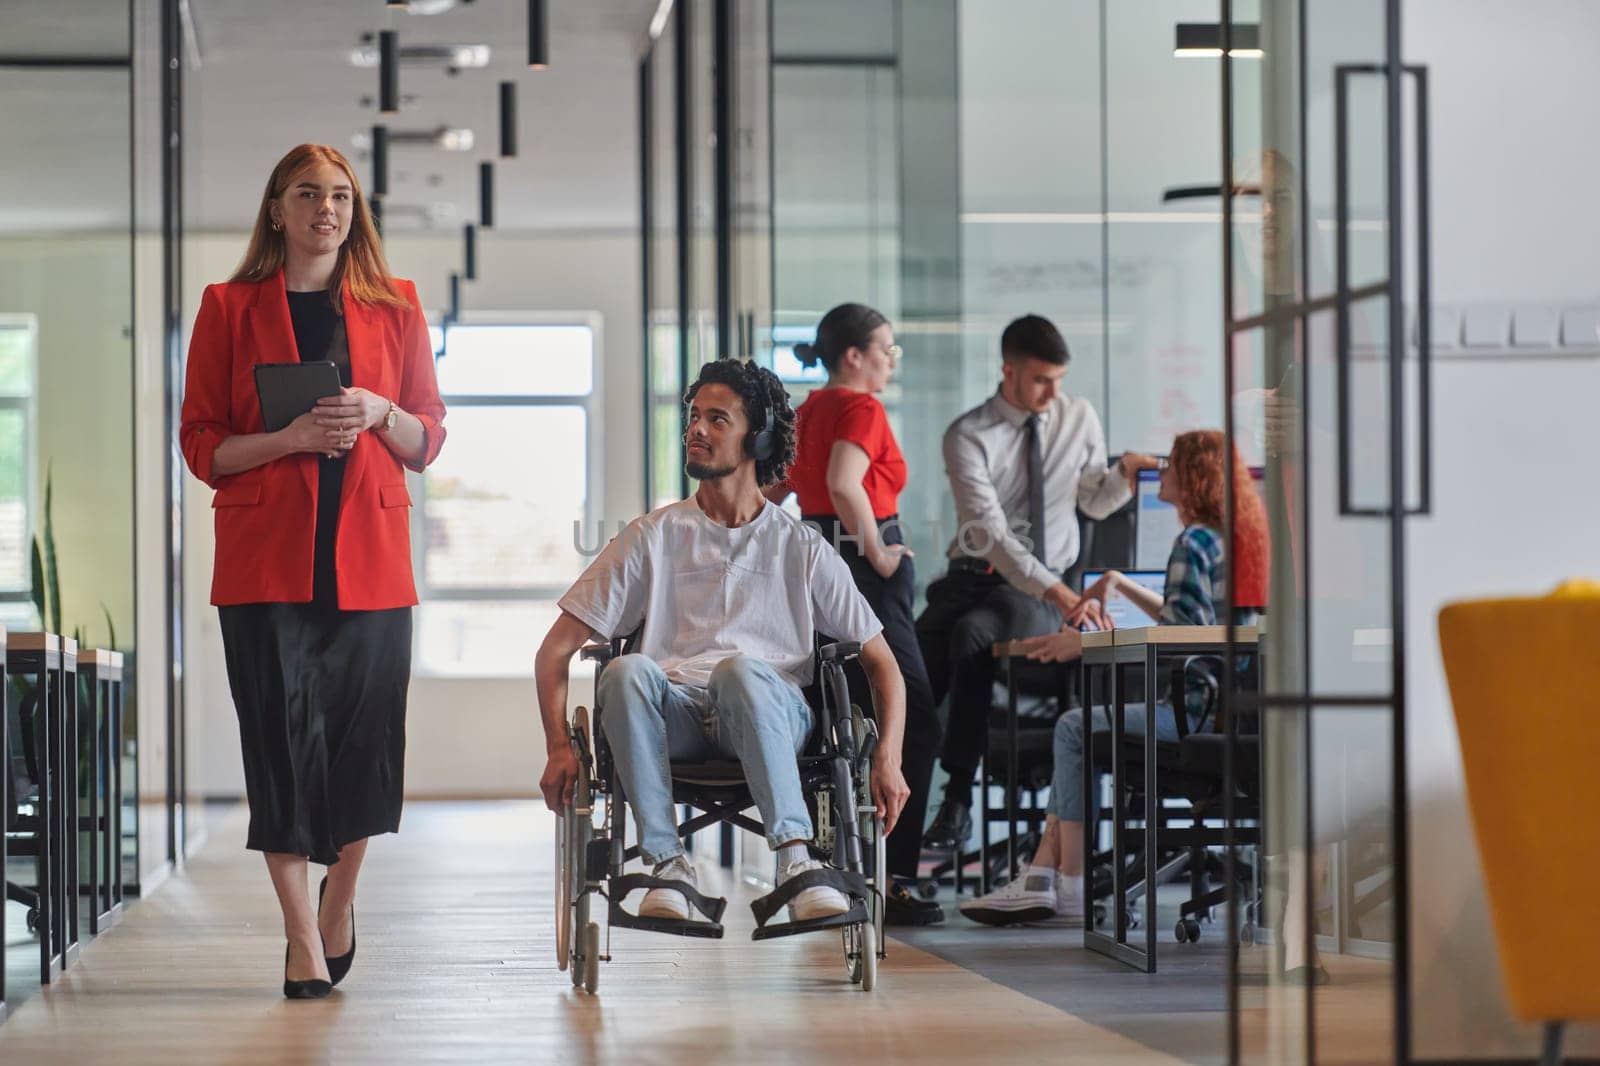 A group of young business people in a modern glass-walled office captures the essence of diversity and collaboration, while two colleagues, including an African American businessman in a wheelchair, reflect inclusivity and discuss solving business problems.